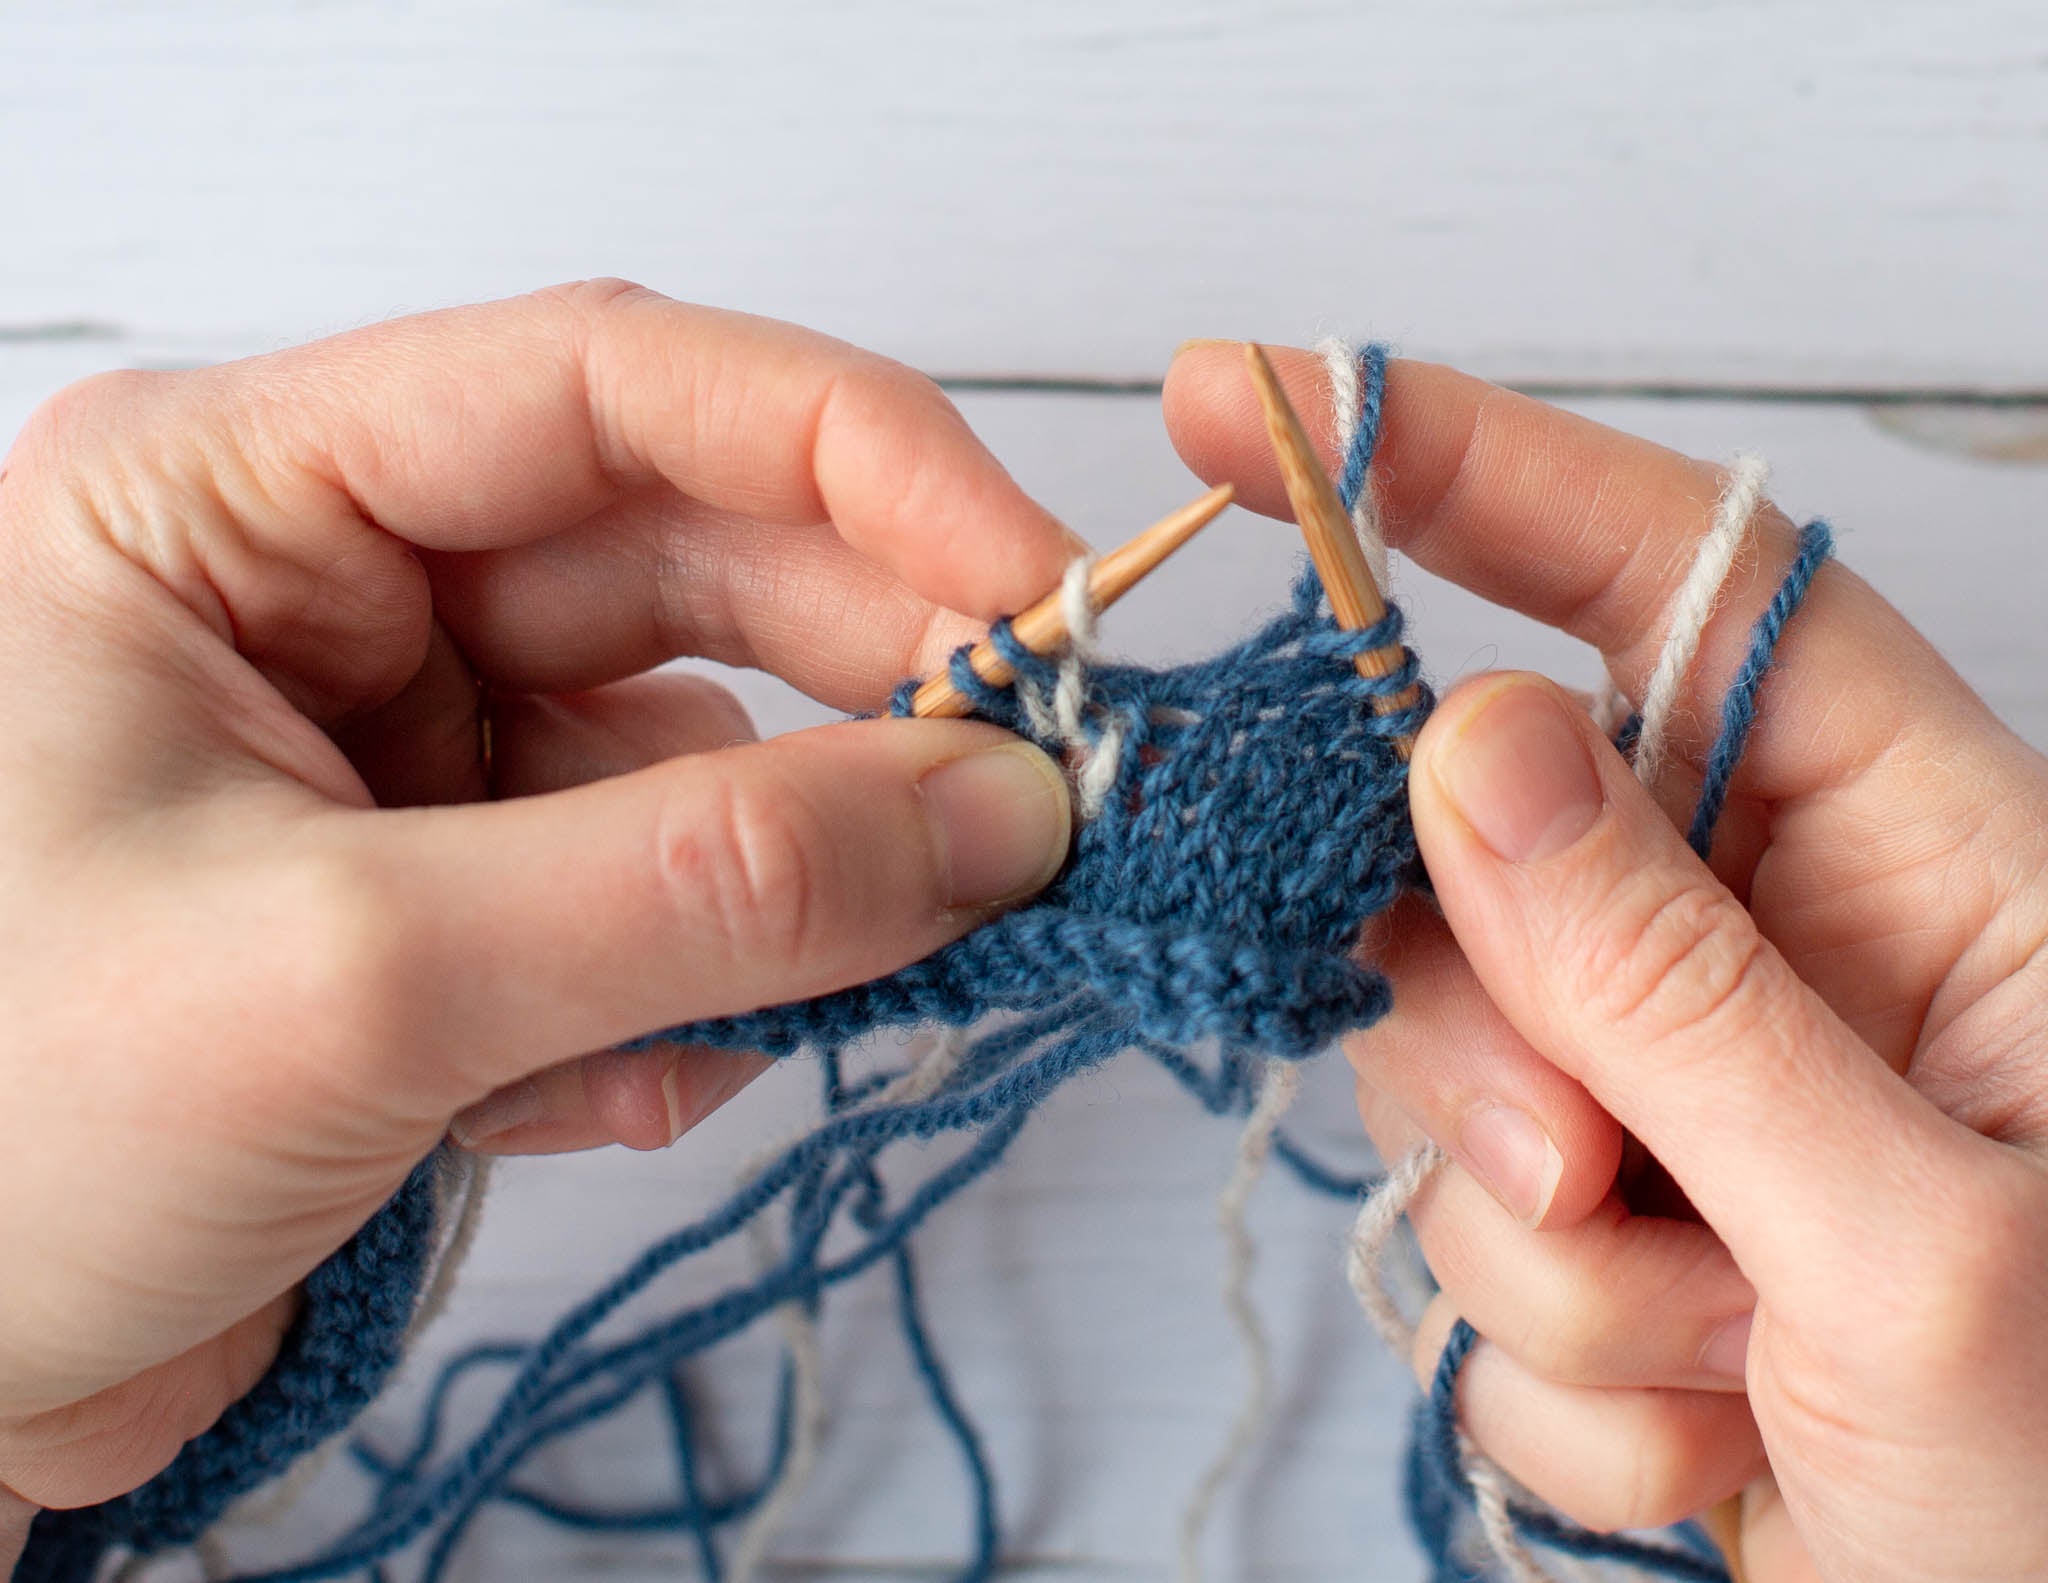 Two white hands hold a blue and white piece of knitting, on wooden knitting needles. The left hand grips the fabric and the right hand has a blue and white strands of yarn wrapped twice around the index finger.